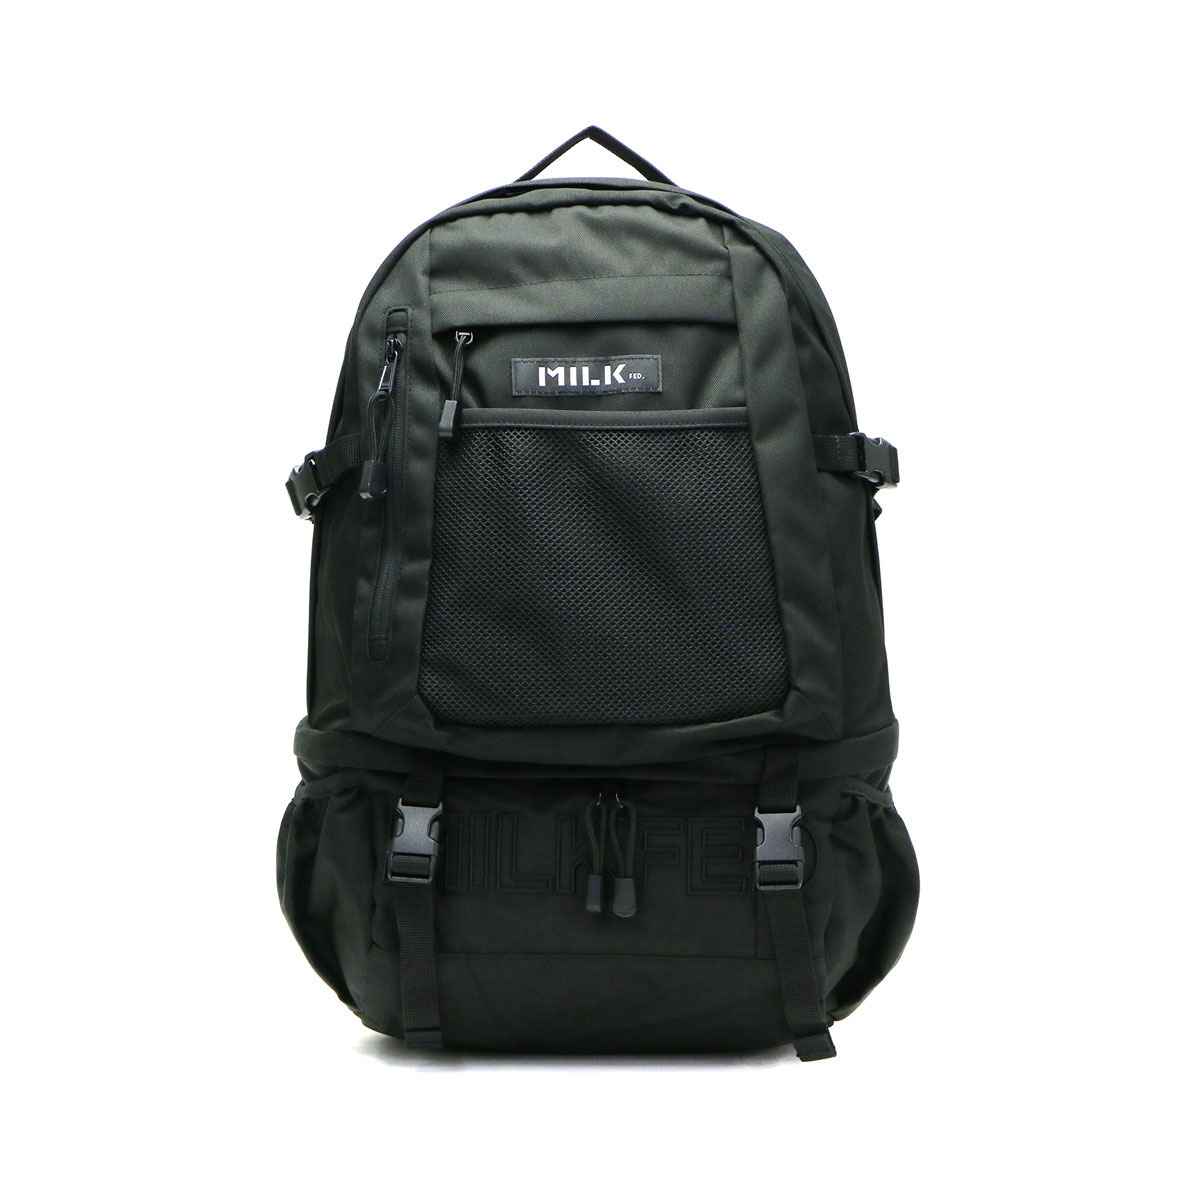 MILKFED. ミルクフェド EMBROIDERY BIG BACKPACK BAR バックパック 23L